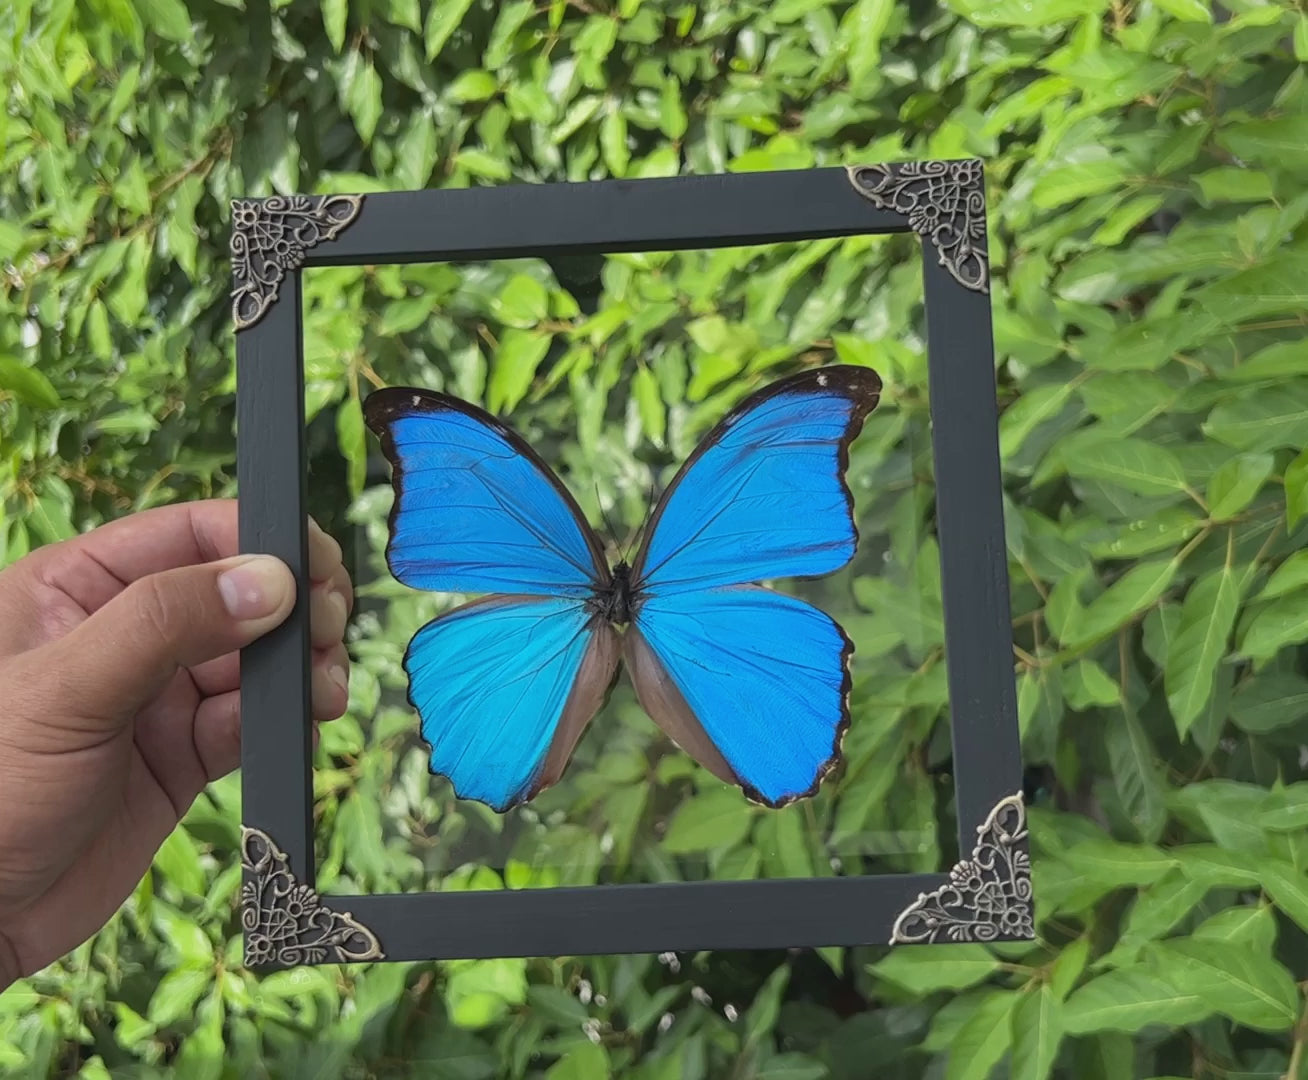 Vinatimes Real Framed Morpho Butterfly Handmade Glass Frame Shadow Box Dried Insect Lover Taxidermy Dead Bug Specimen Display Tabletop Wall Art Hanging Decoration Home Decor Living Reading Gallery K19-22-KINH